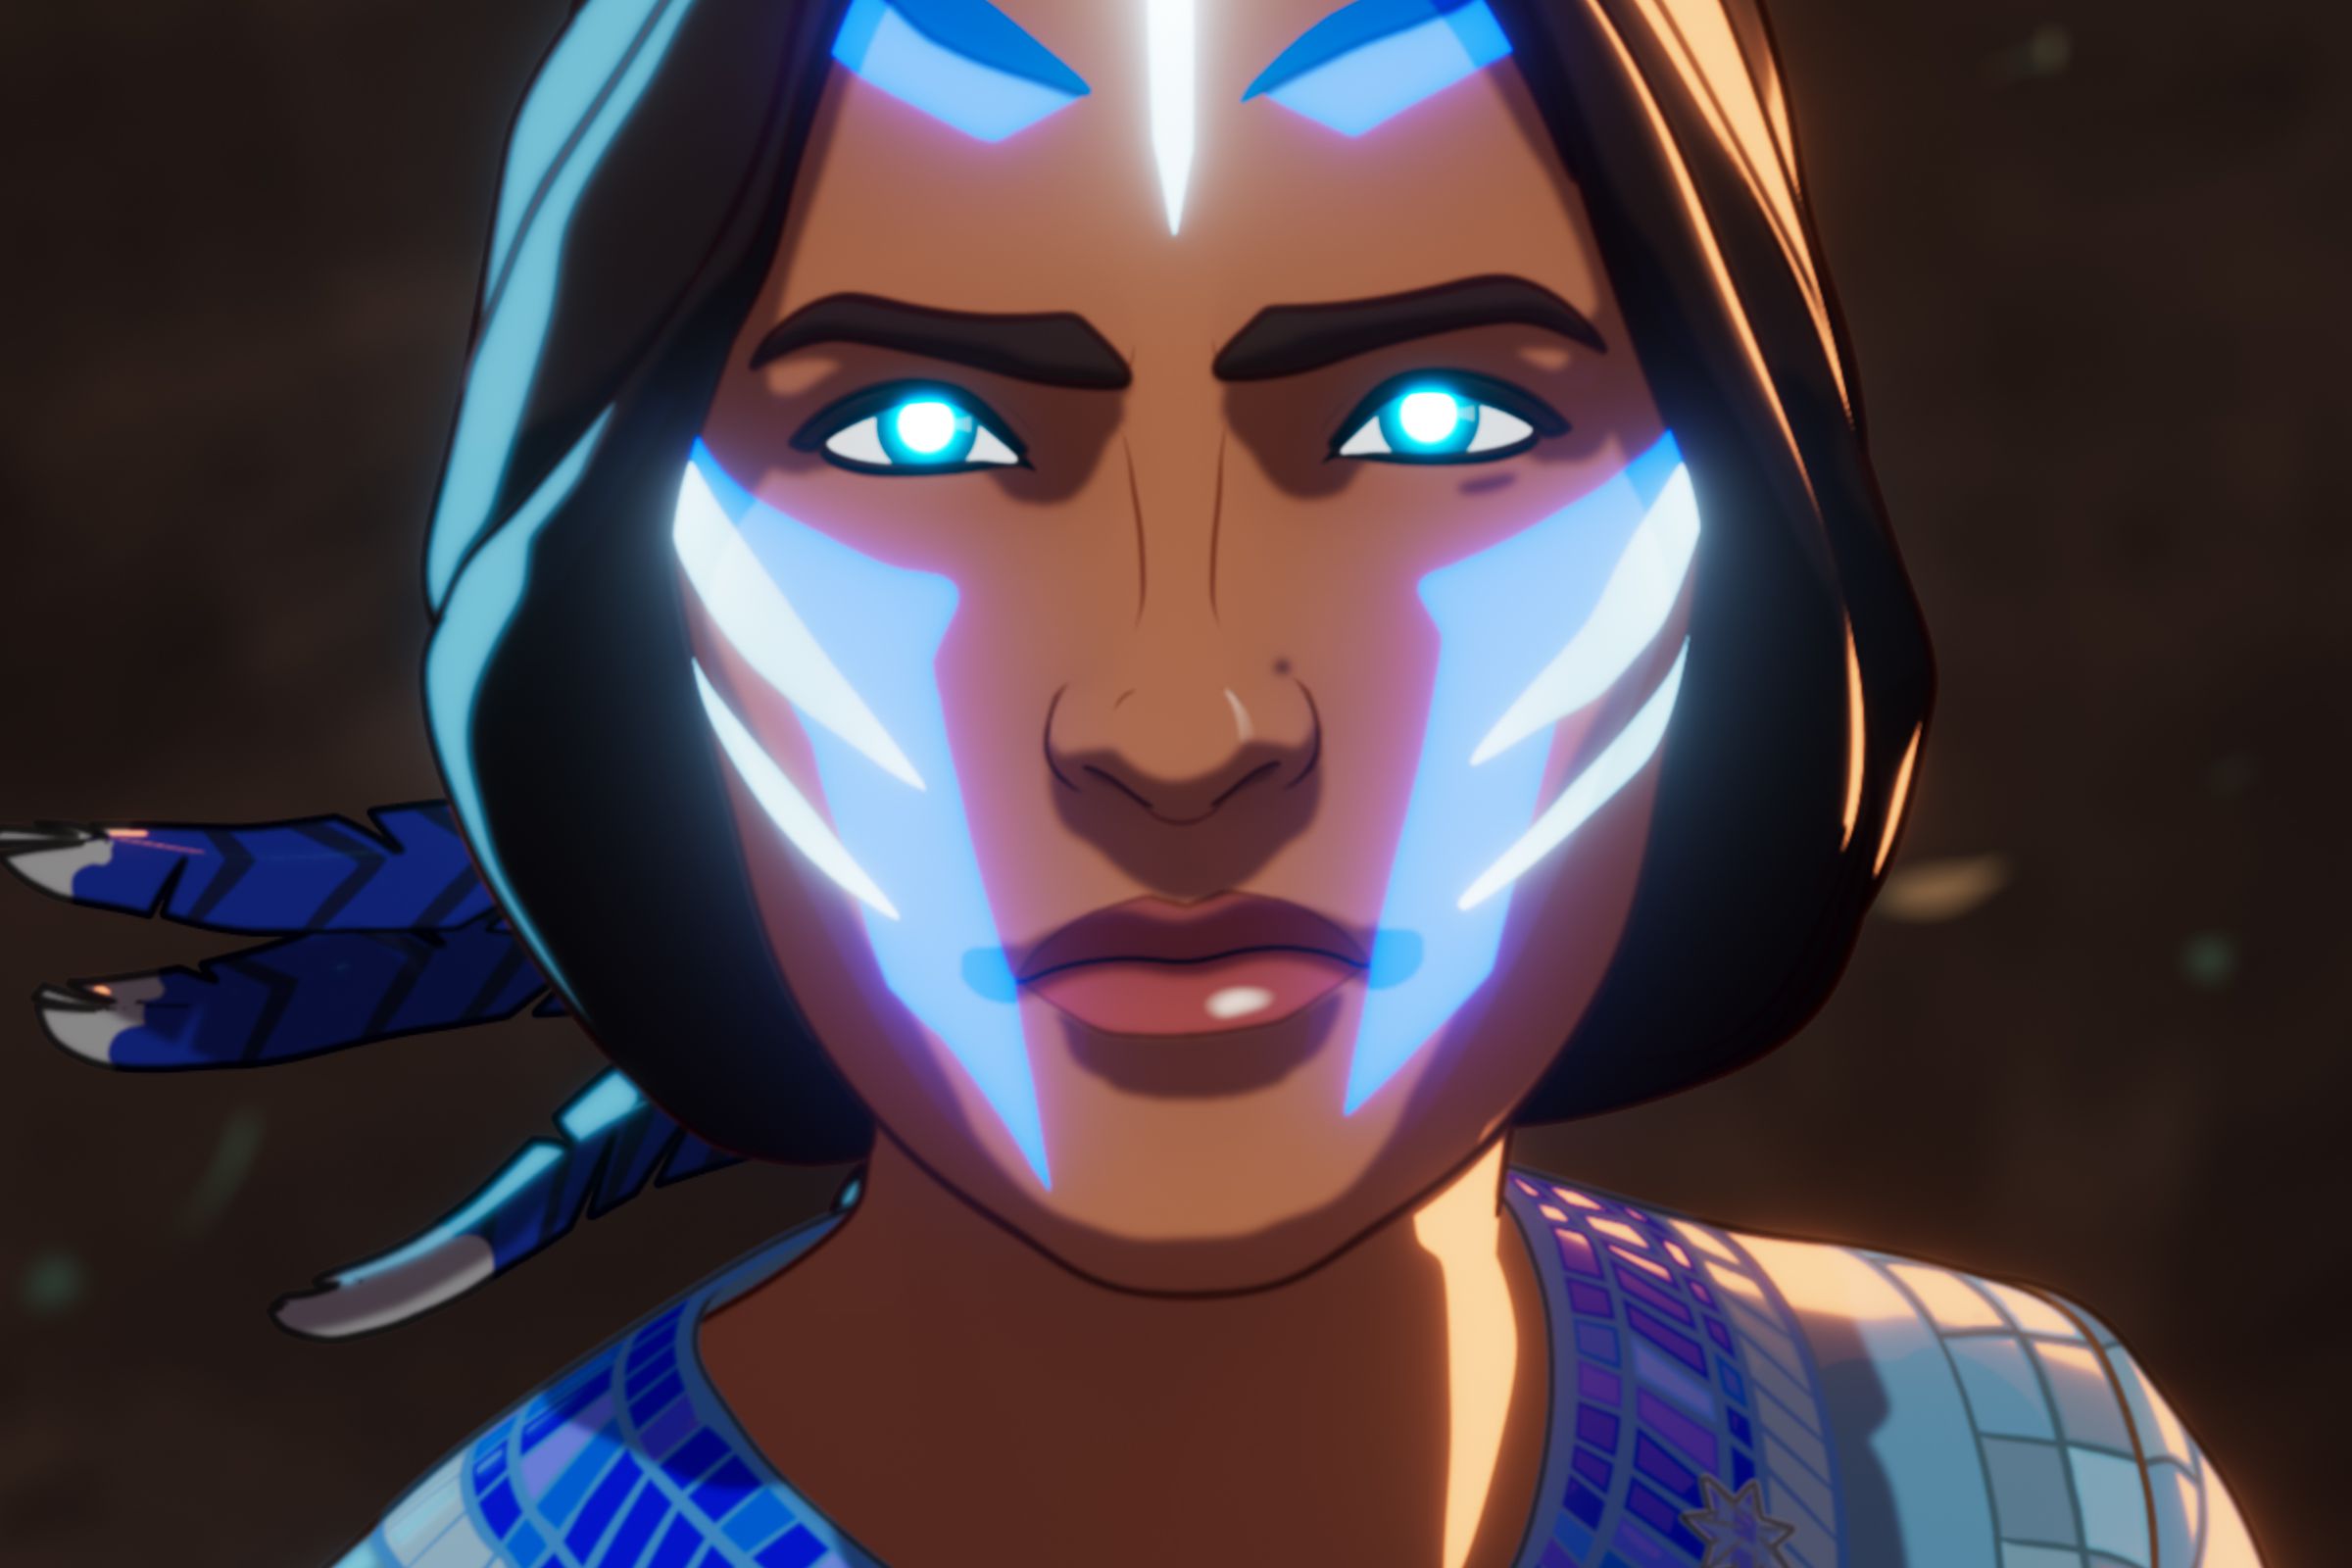 A tight shot of a young Native American woman whose face is adorned in glowing blue and white markings.